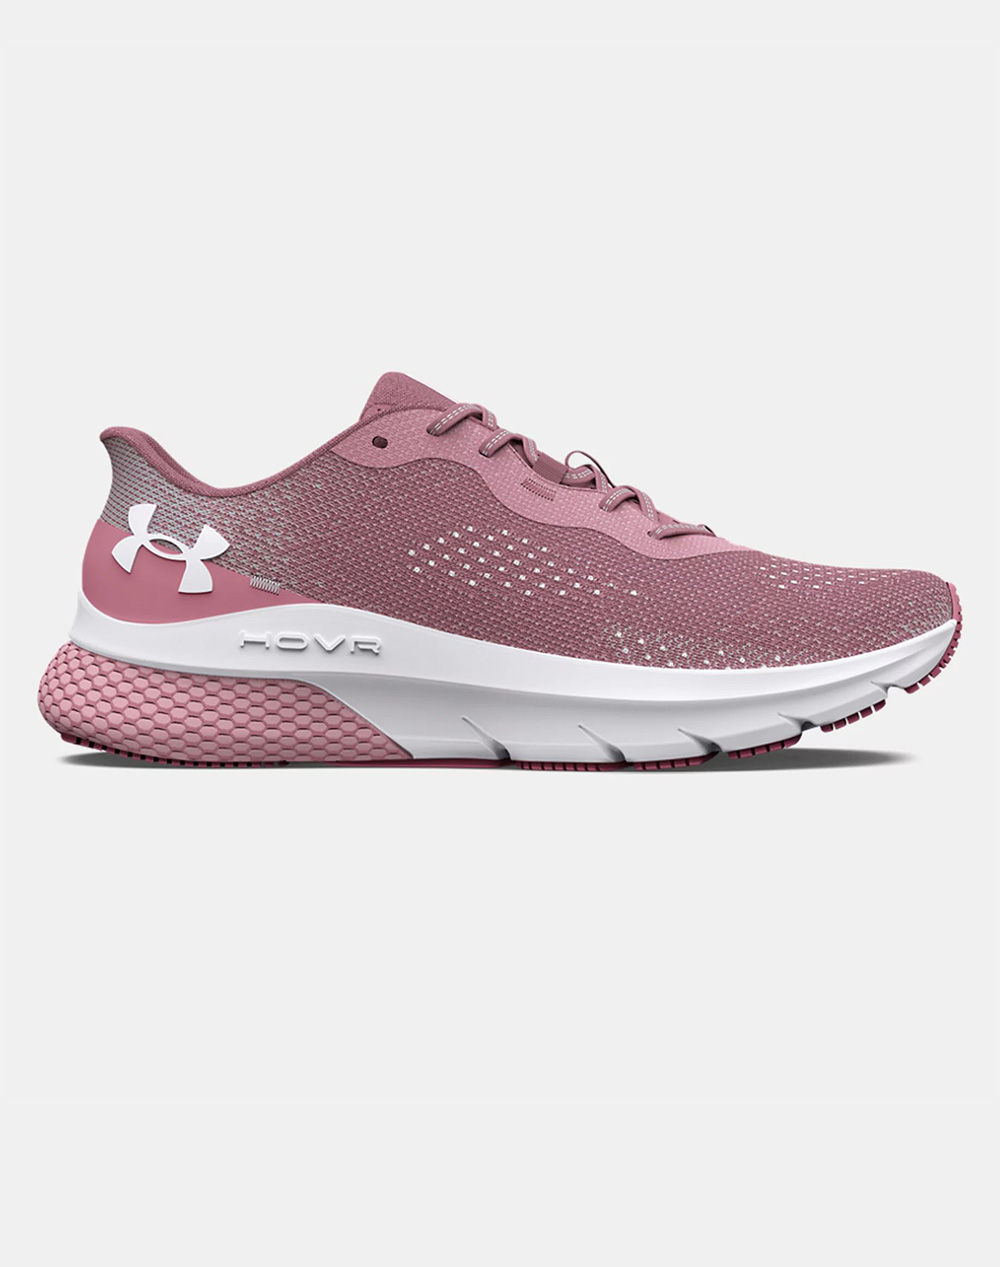 UNDER ARMOUR Women”s UA HOVR™ Turbulence 2 Running Shoes 3026525-P7P7 Pink 3710AUNDE6070007_XR25217